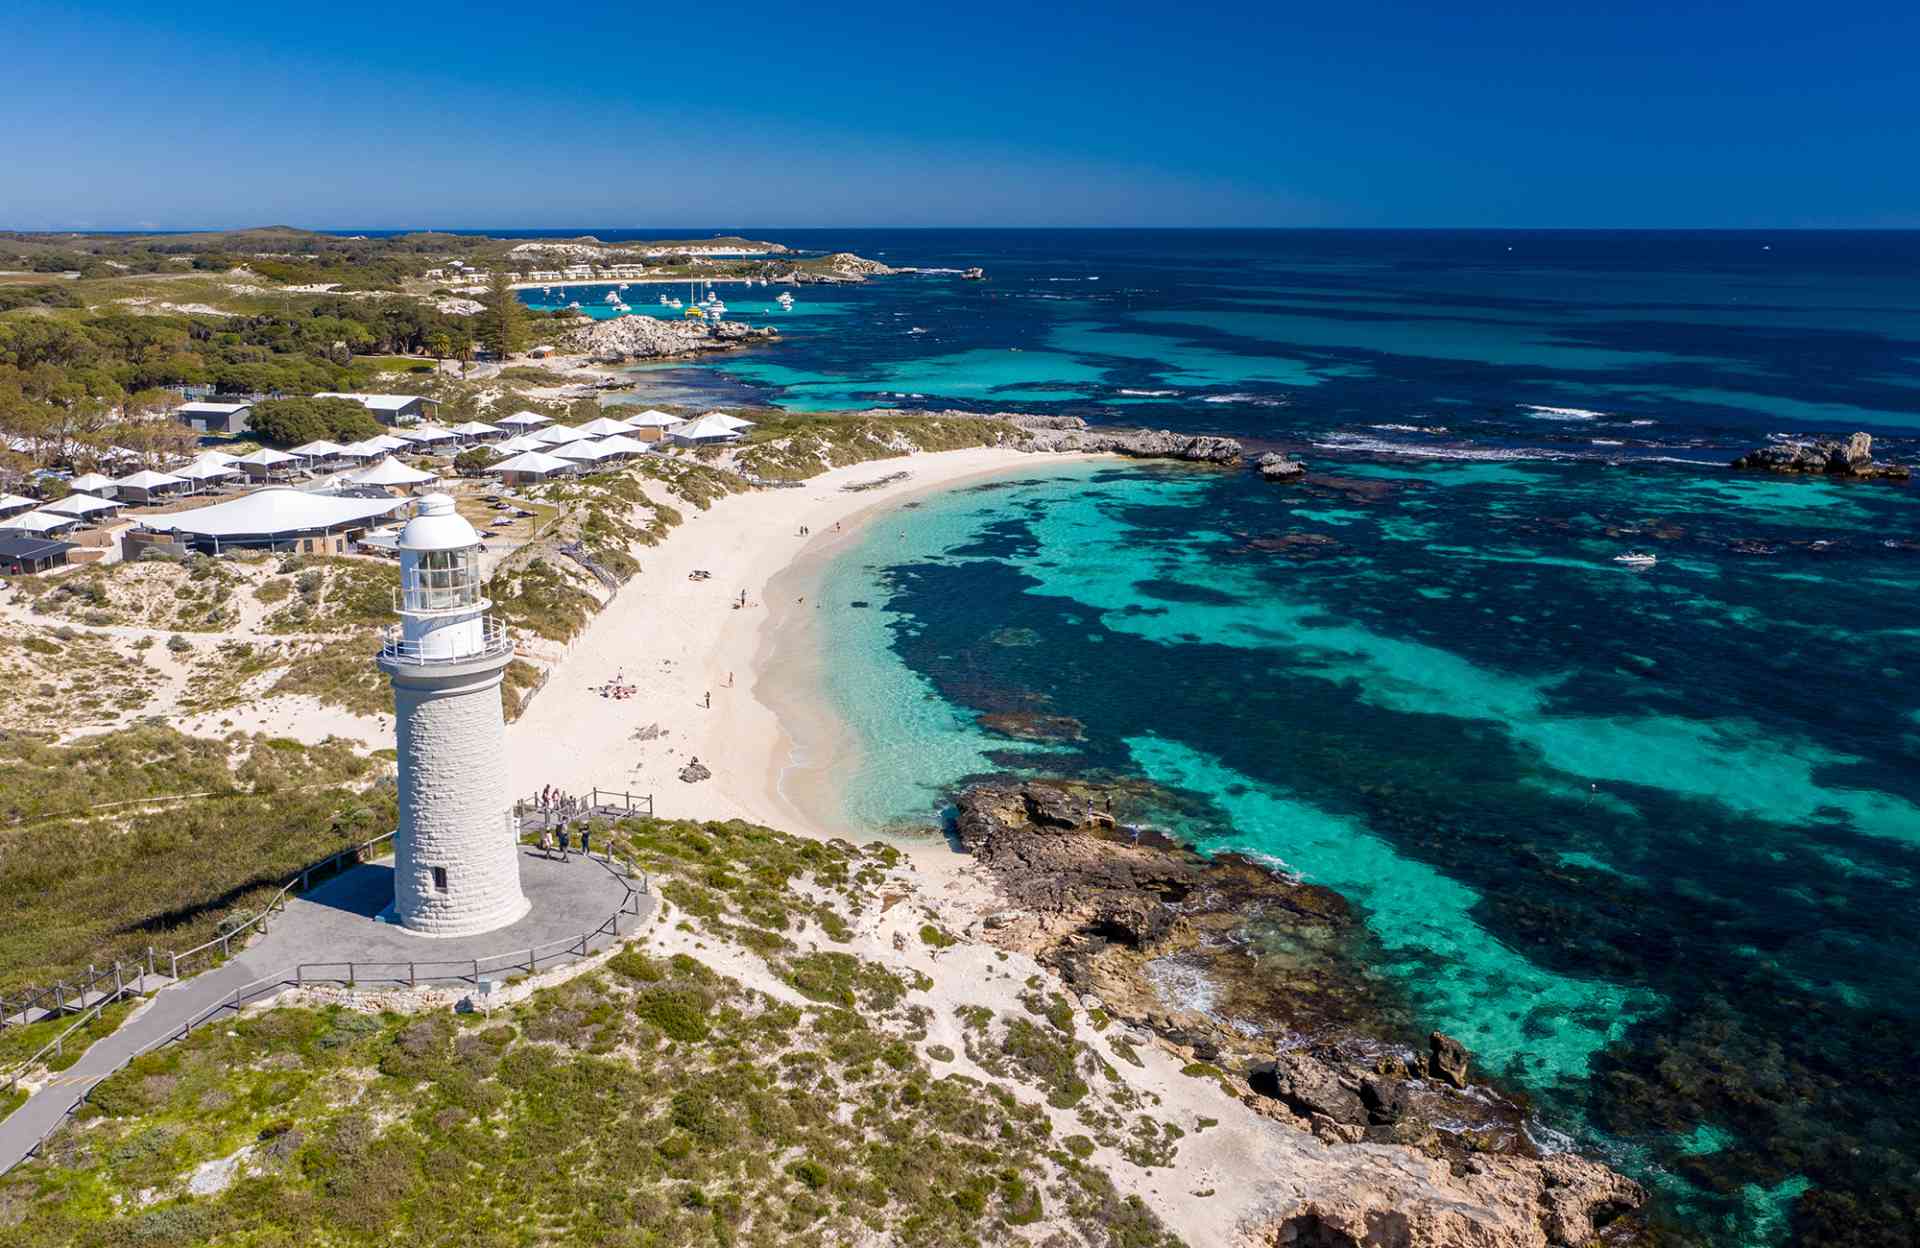 Underwater scene showcasing vibrant coral reefs and diverse marine life off the coast of Rottnest Island, perfect for snorkeling and diving enthusiasts.